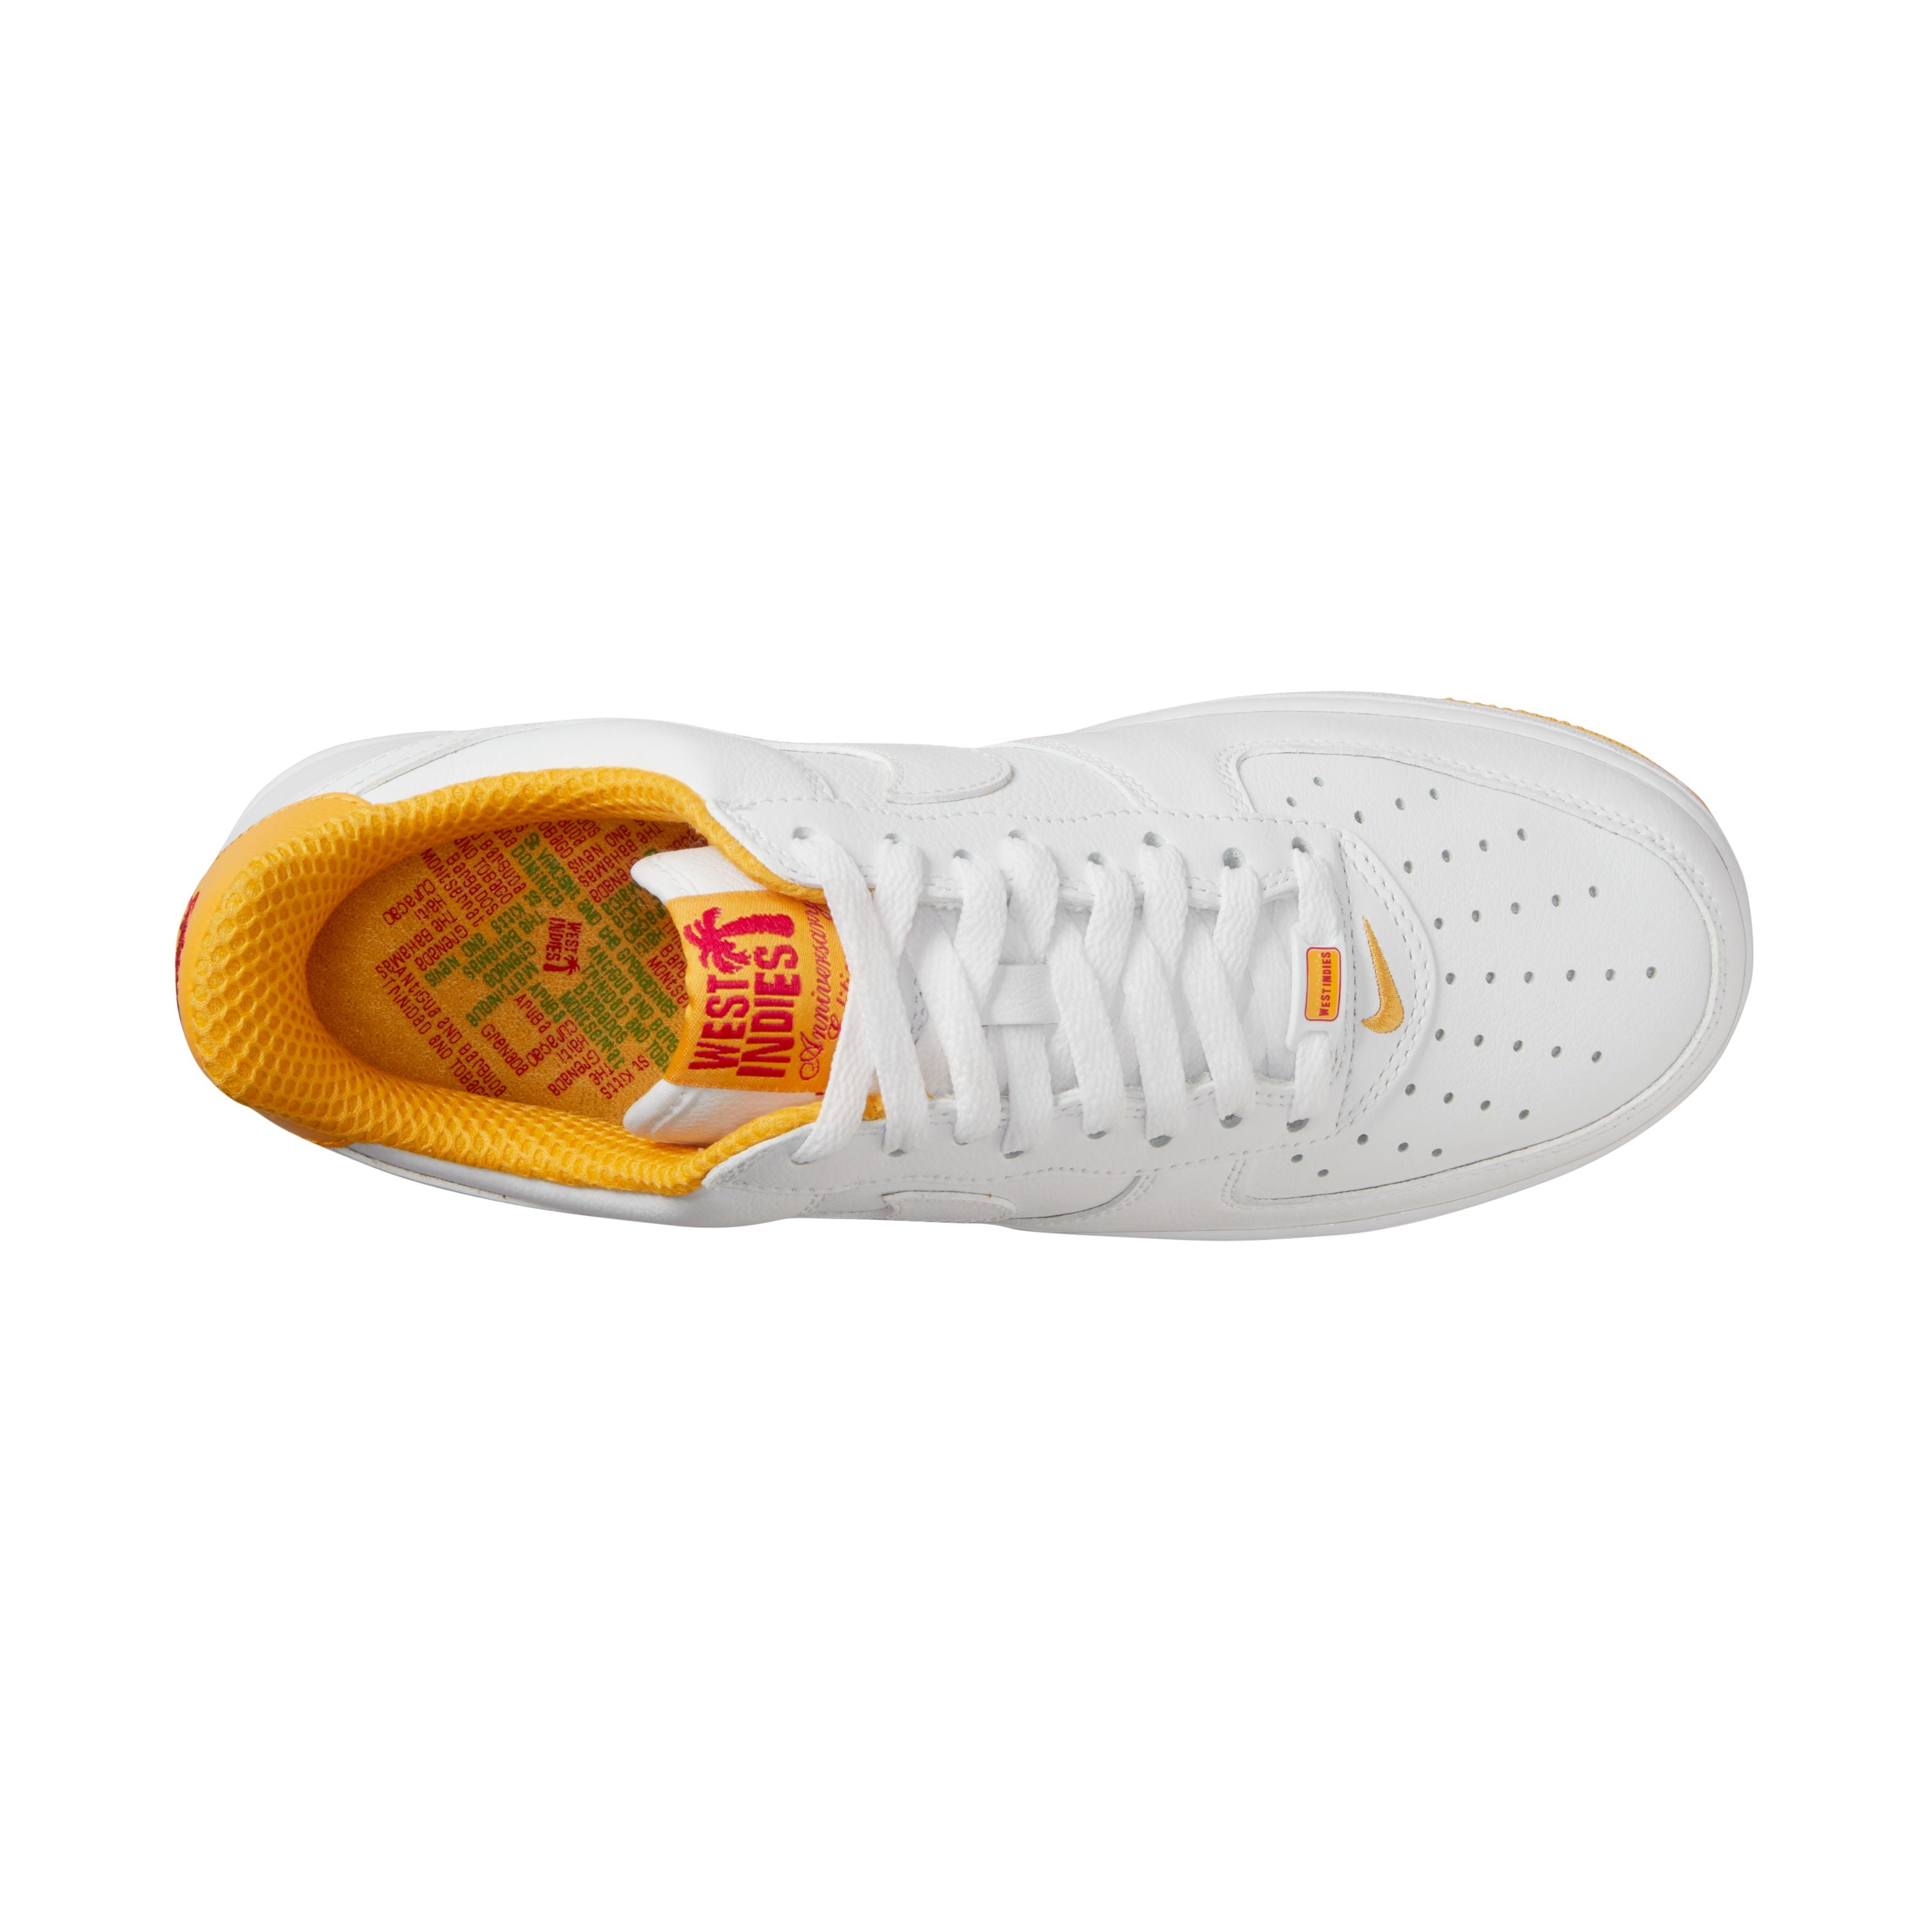 Air Force 1 Low Retro - &#39;West Indies&#39; - White/University Gold